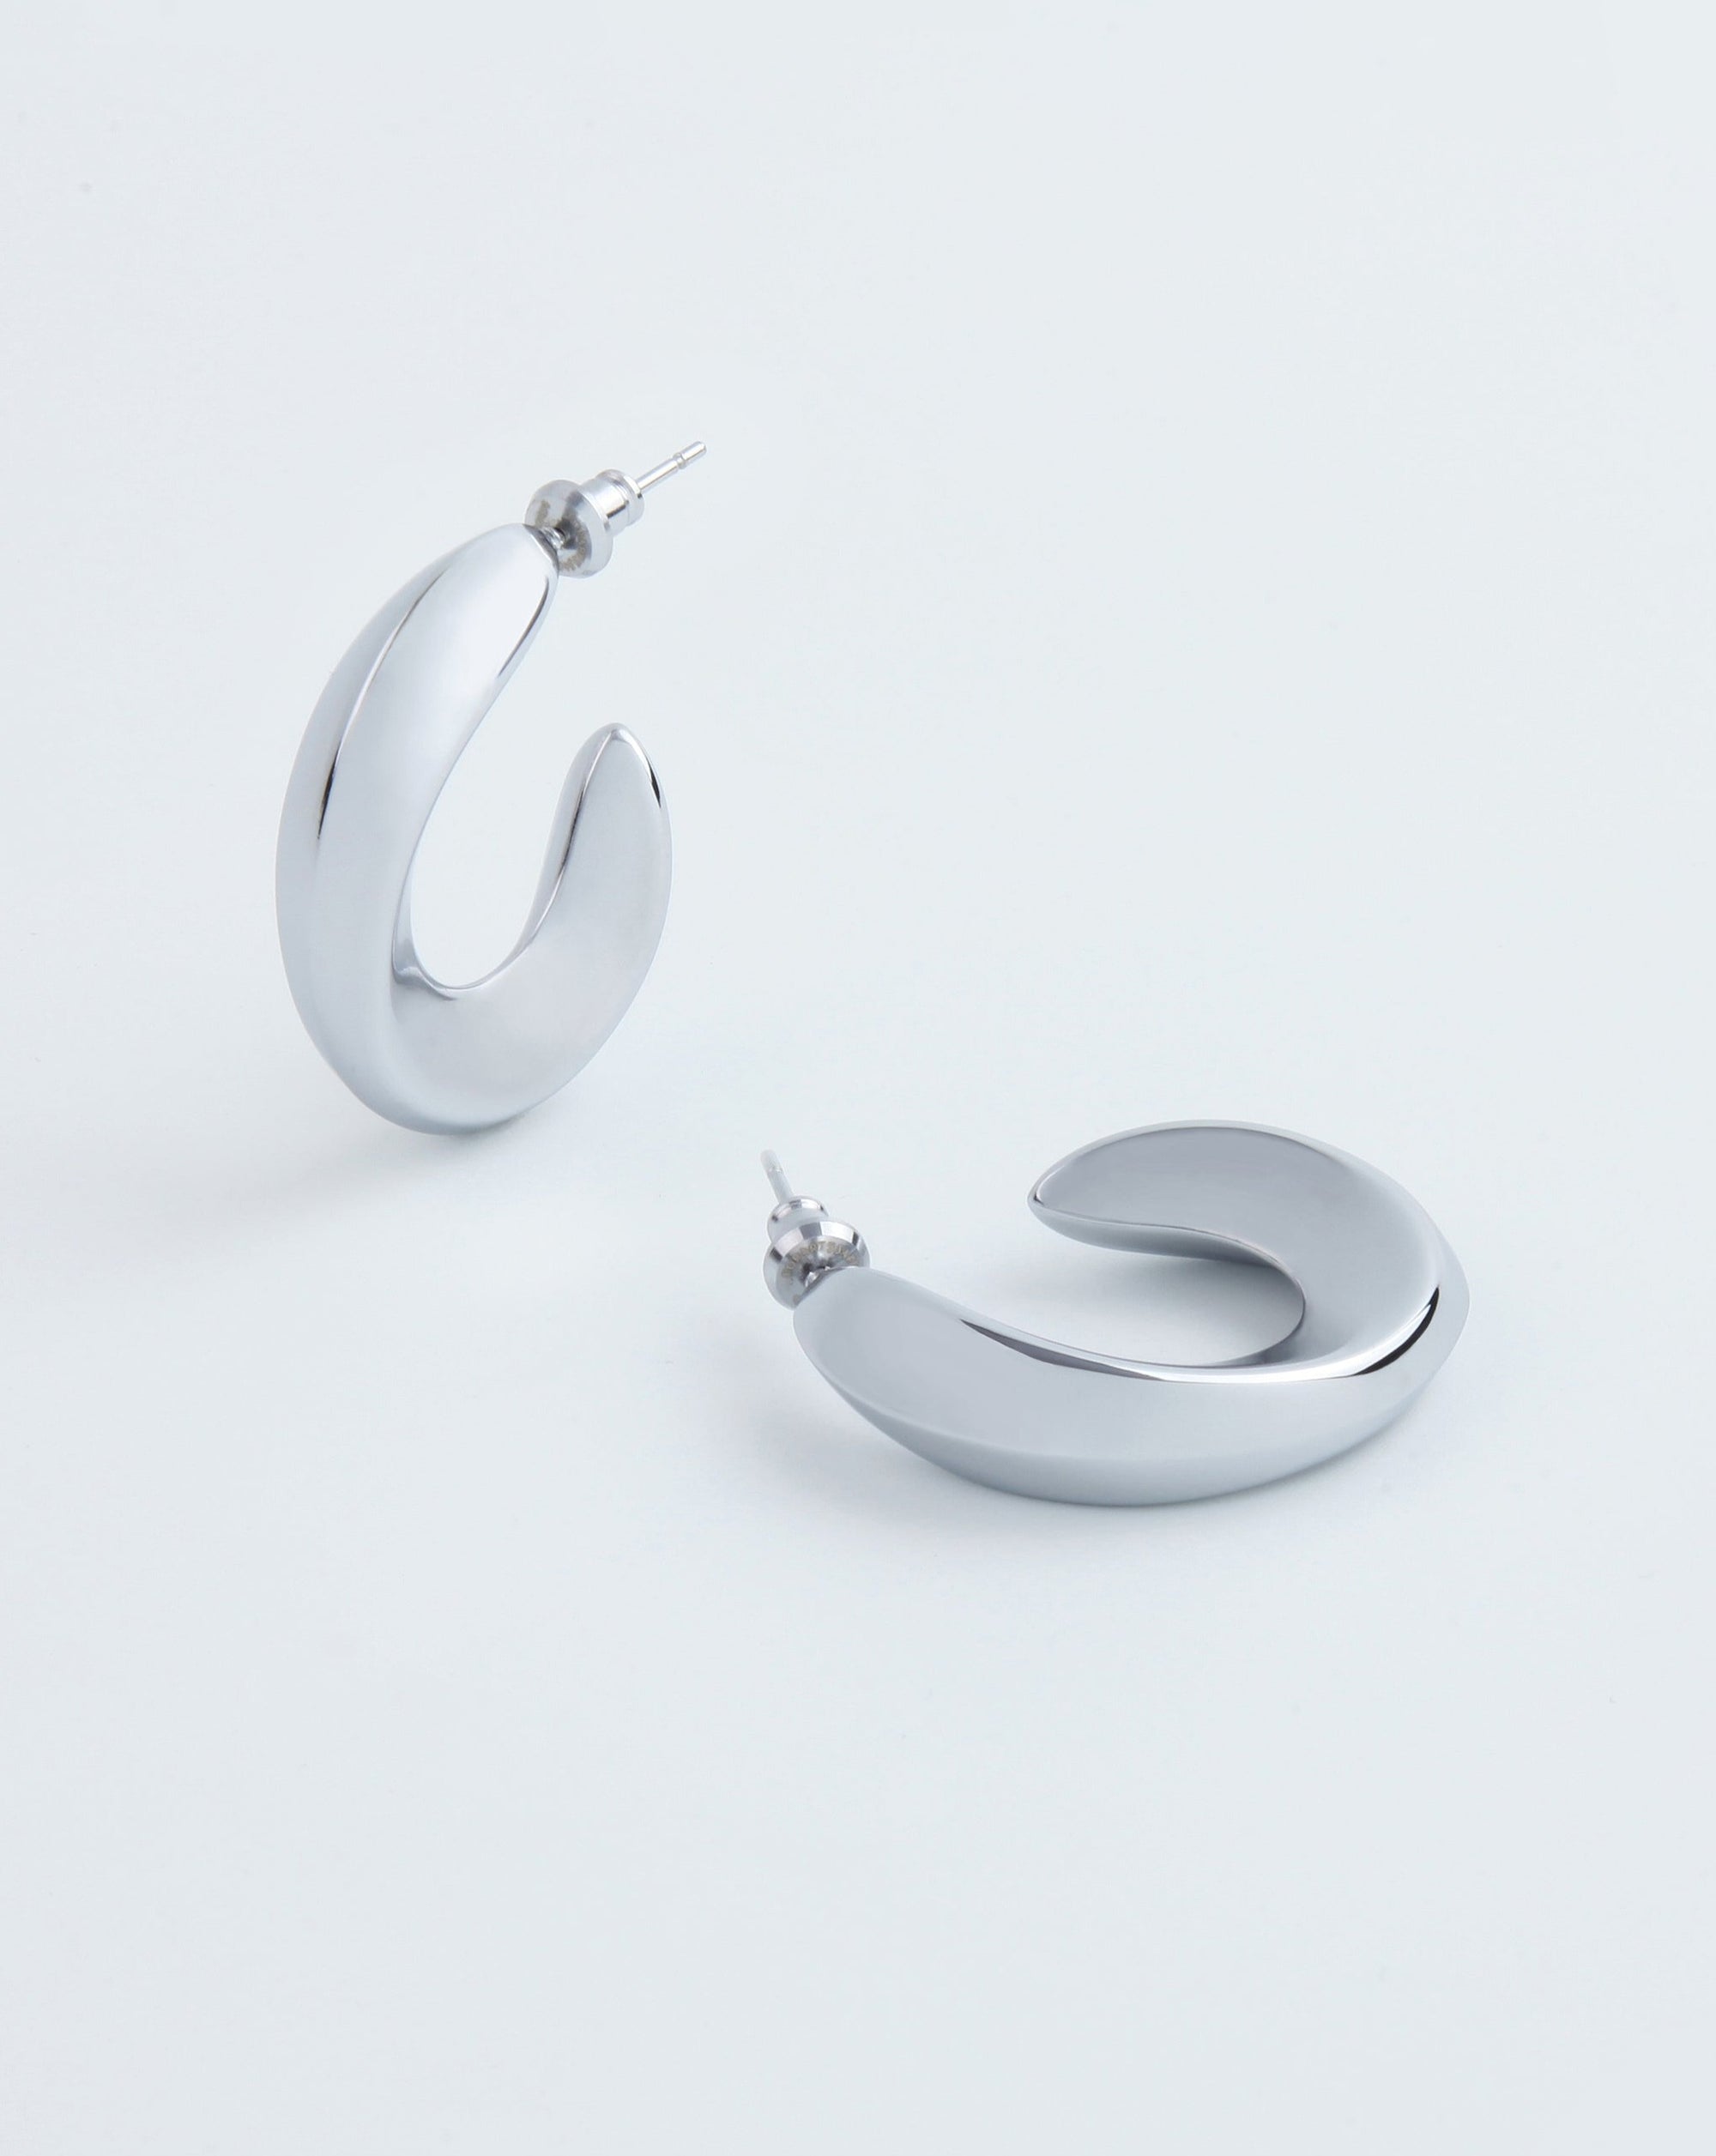 A pair of stylish, chunky Wave Earrings Silver by For Art's Sake® with a unique, open-ended design. The metallic surface has a polished, reflective finish. The earrings are positioned on a plain white background, one standing upright and the other lying flat.